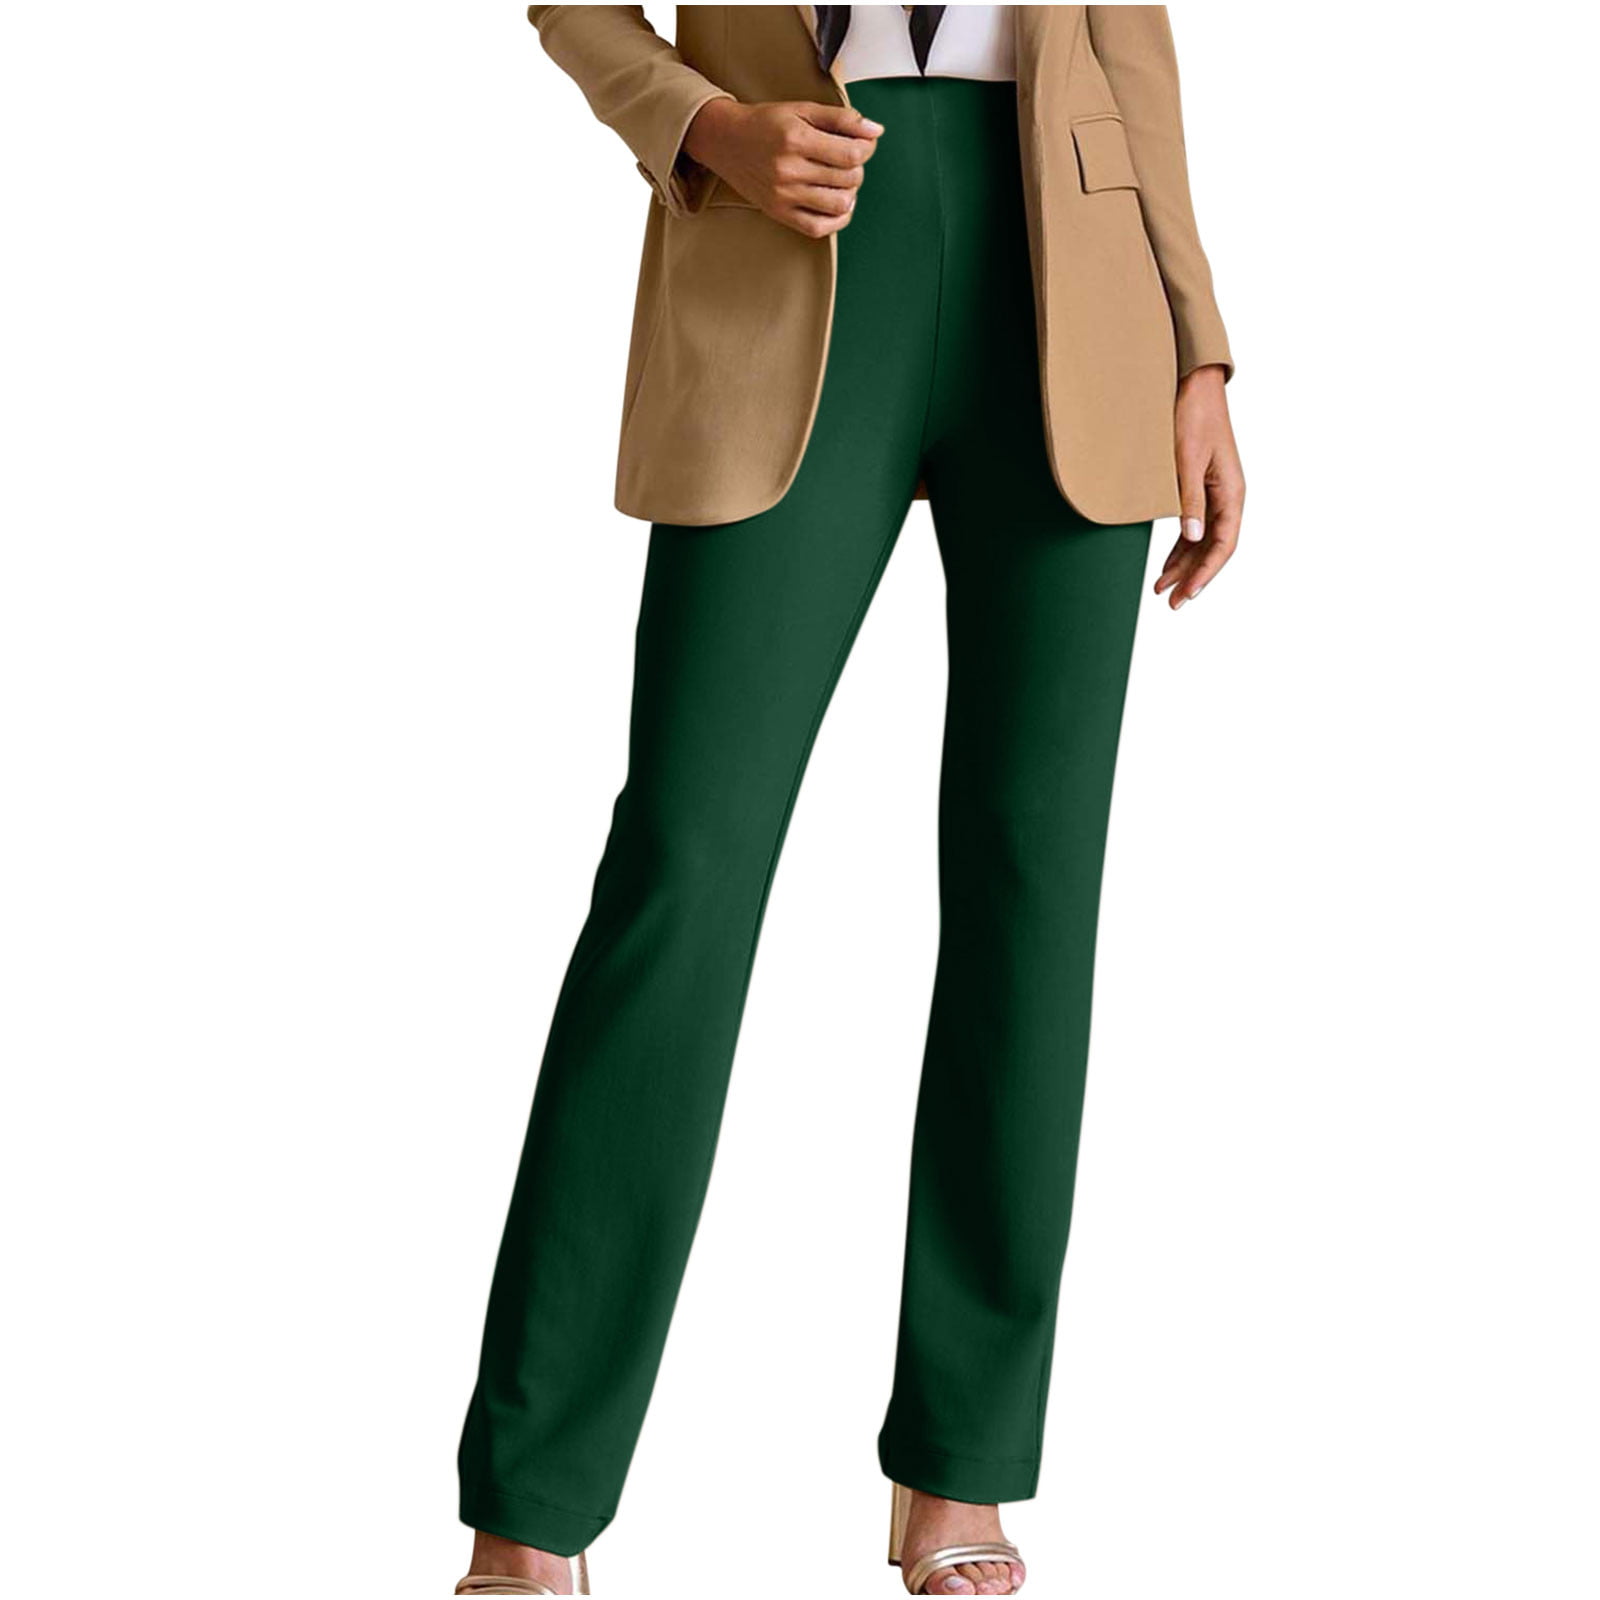  LUYAA Women's Dress Pants Tall Office Dresses for Women for Work  Bootleg Yoga Pants Amry Green S : Clothing, Shoes & Jewelry